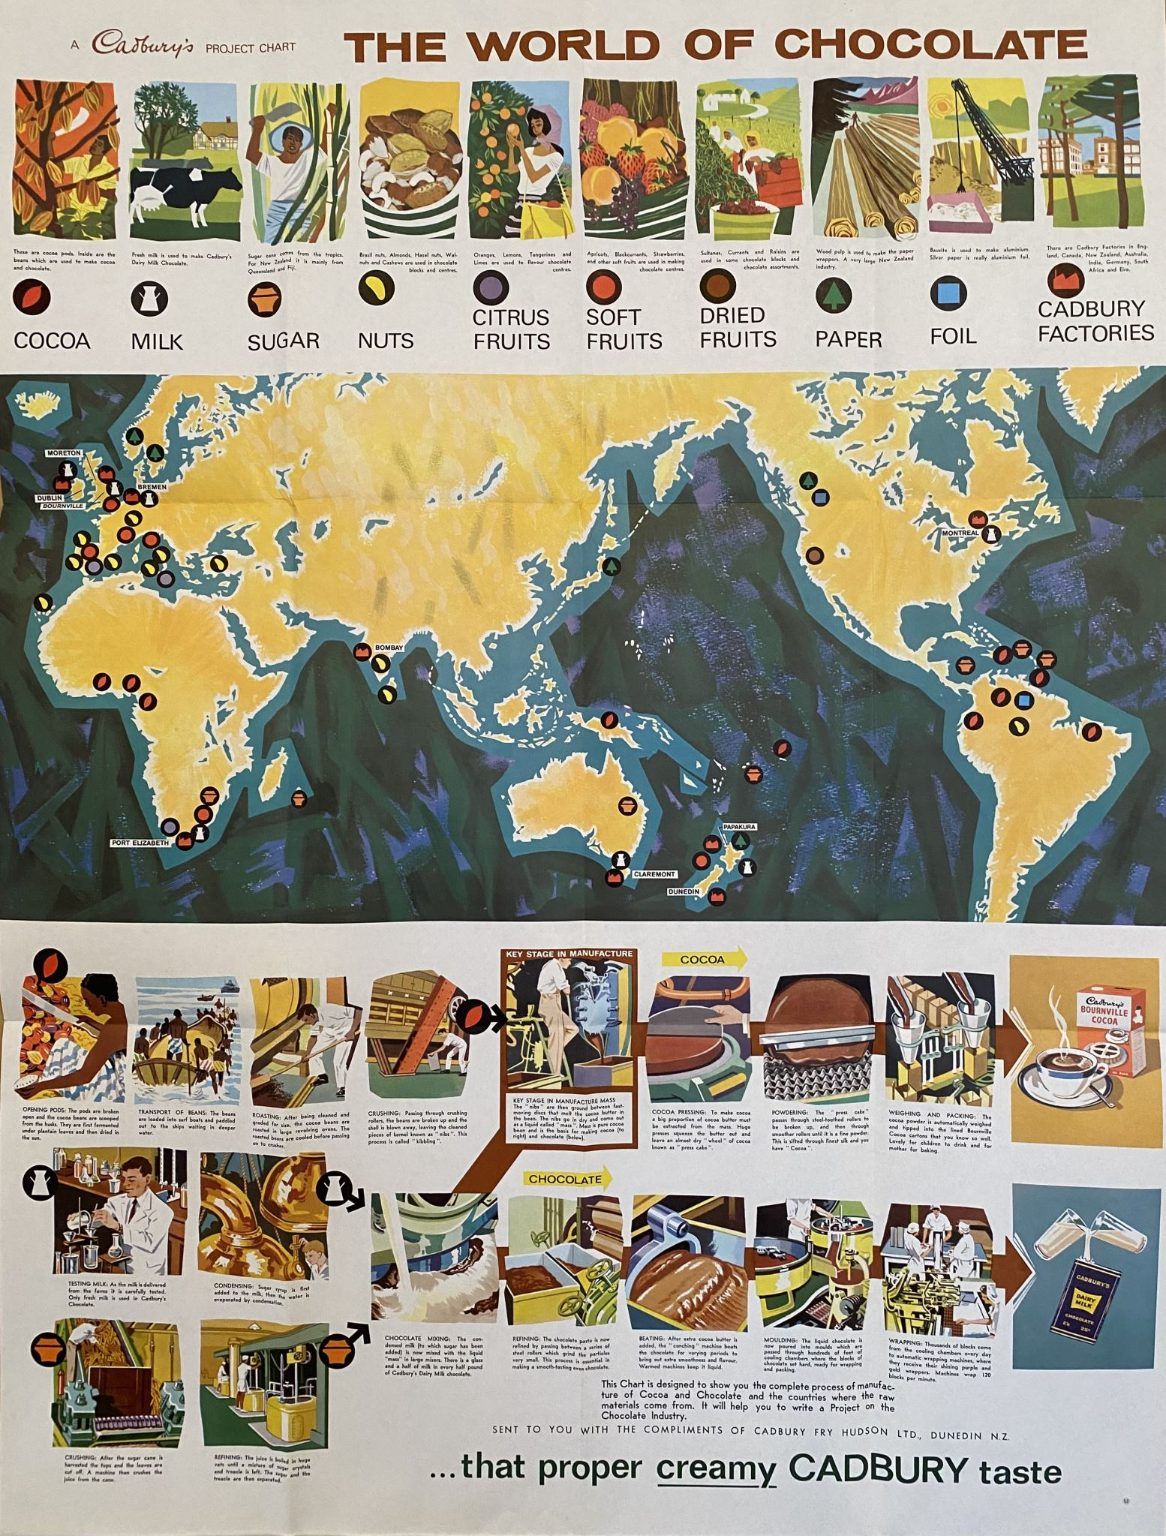 VINTAGE POSTER: The World of Chocolate - Cadbury Project Chart